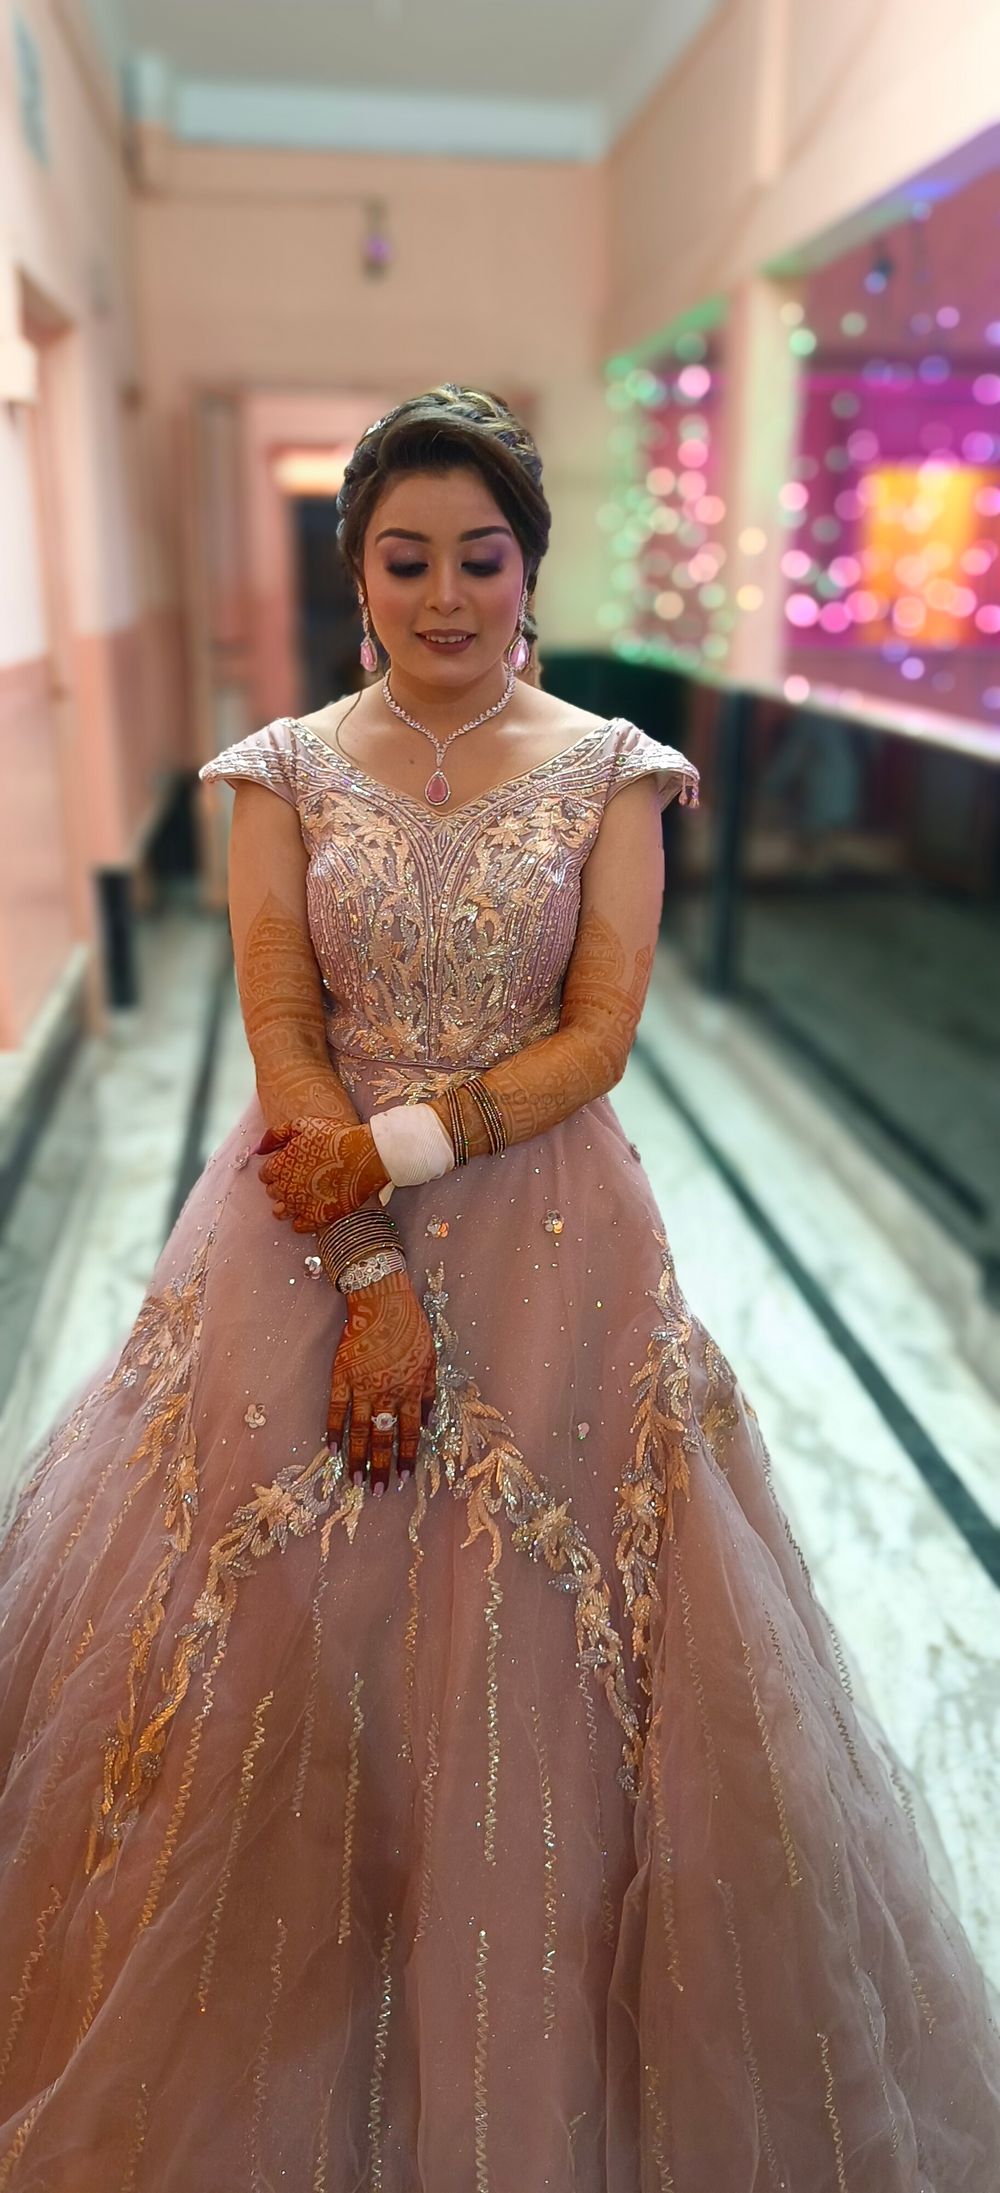 Photo From shruti's engagement and wedding - By Piyali's Makeover